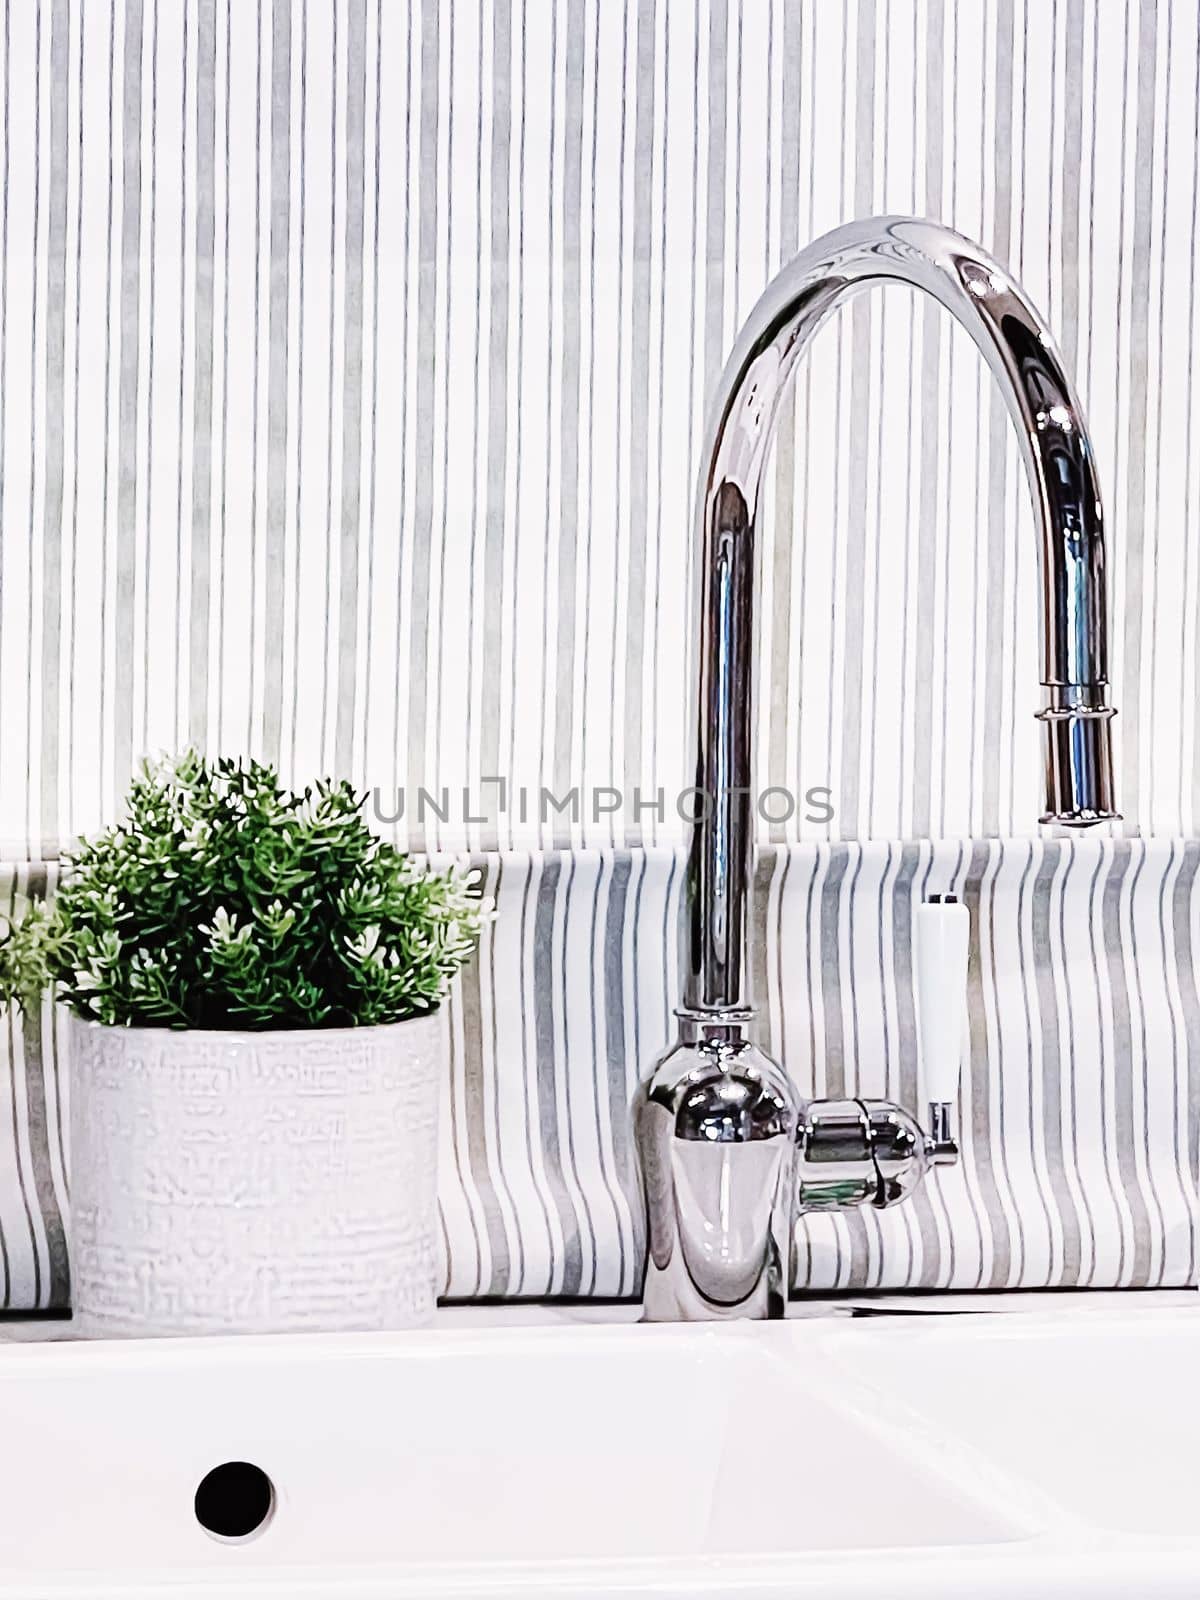 Home decor and interior design, modern kitchen sink faucet, furniture and decoration by Anneleven